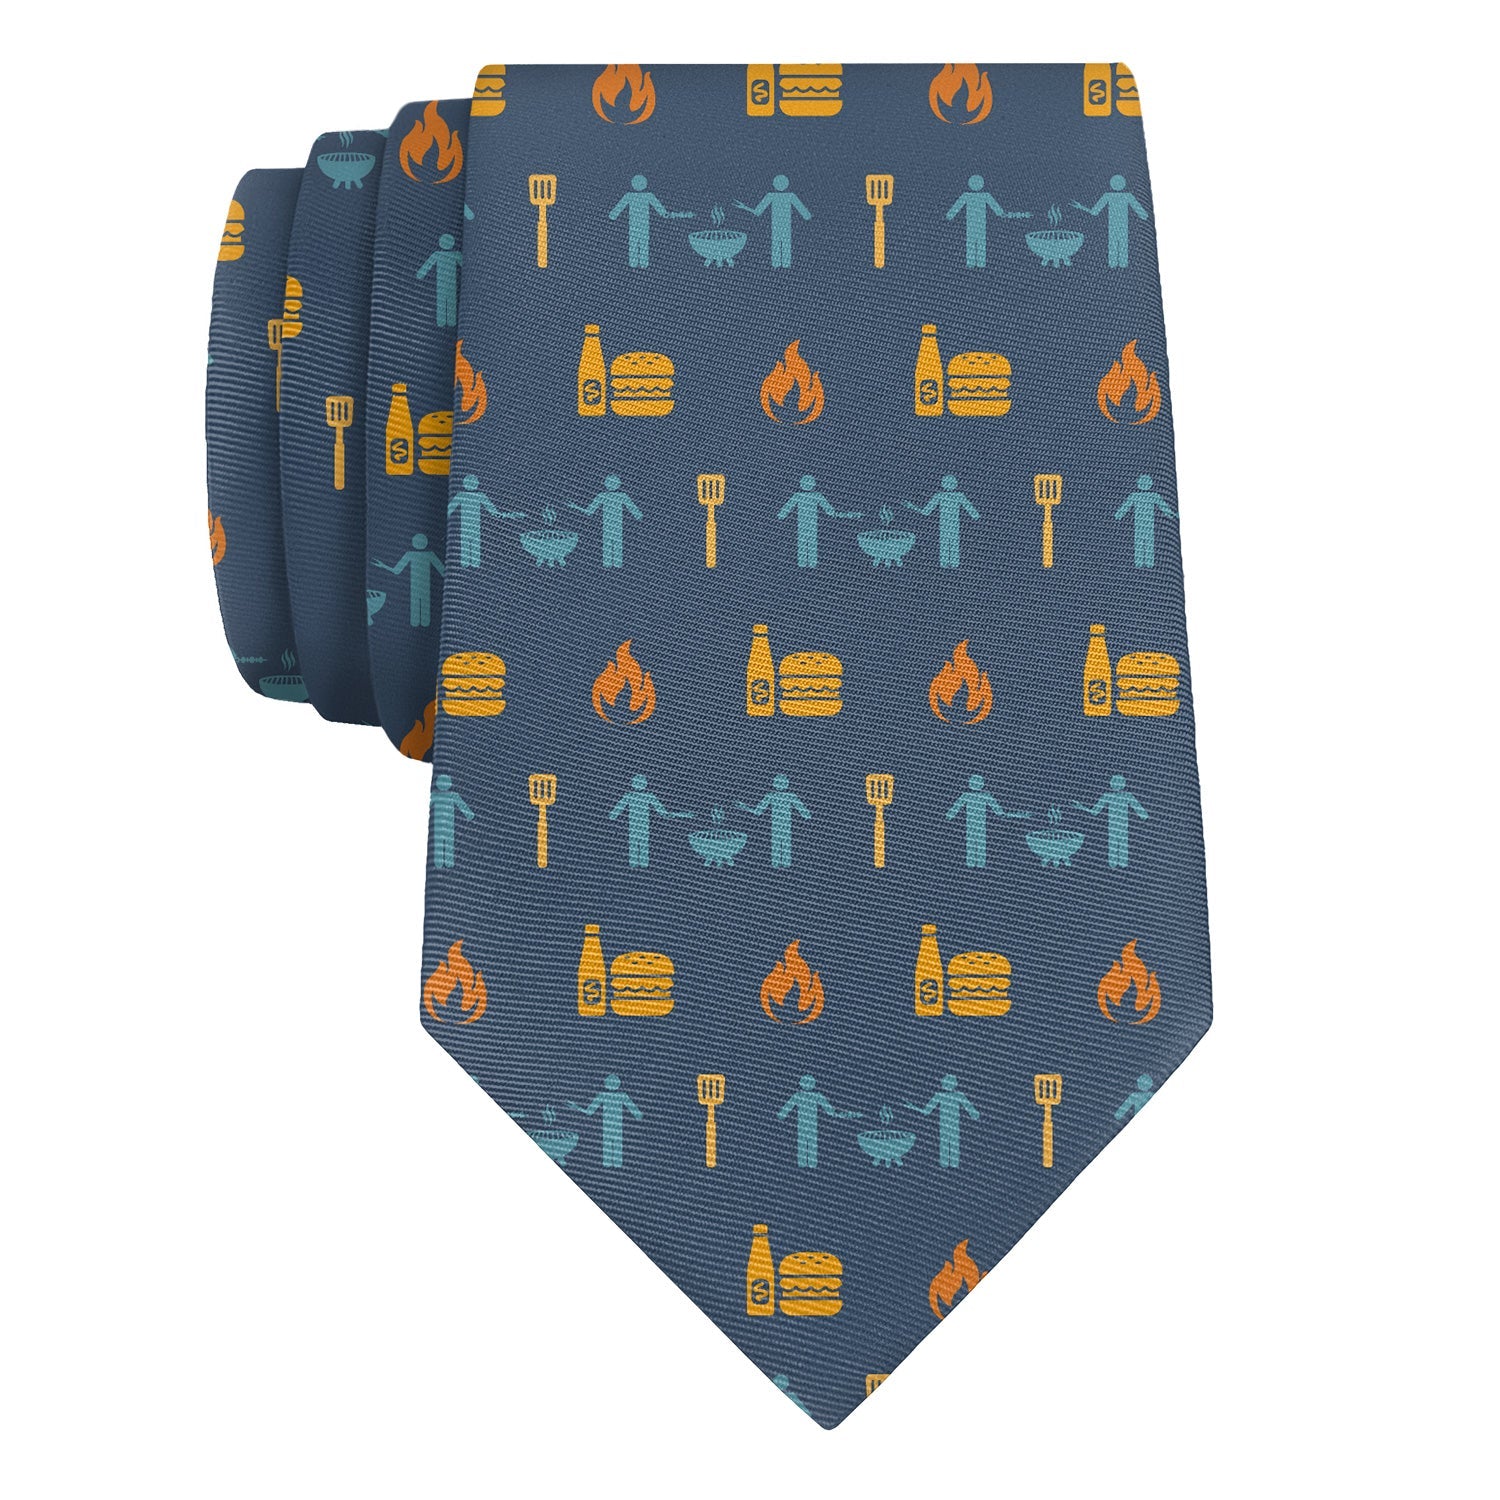 Grilling With Friends Necktie - Knotty 2.75" -  - Knotty Tie Co.